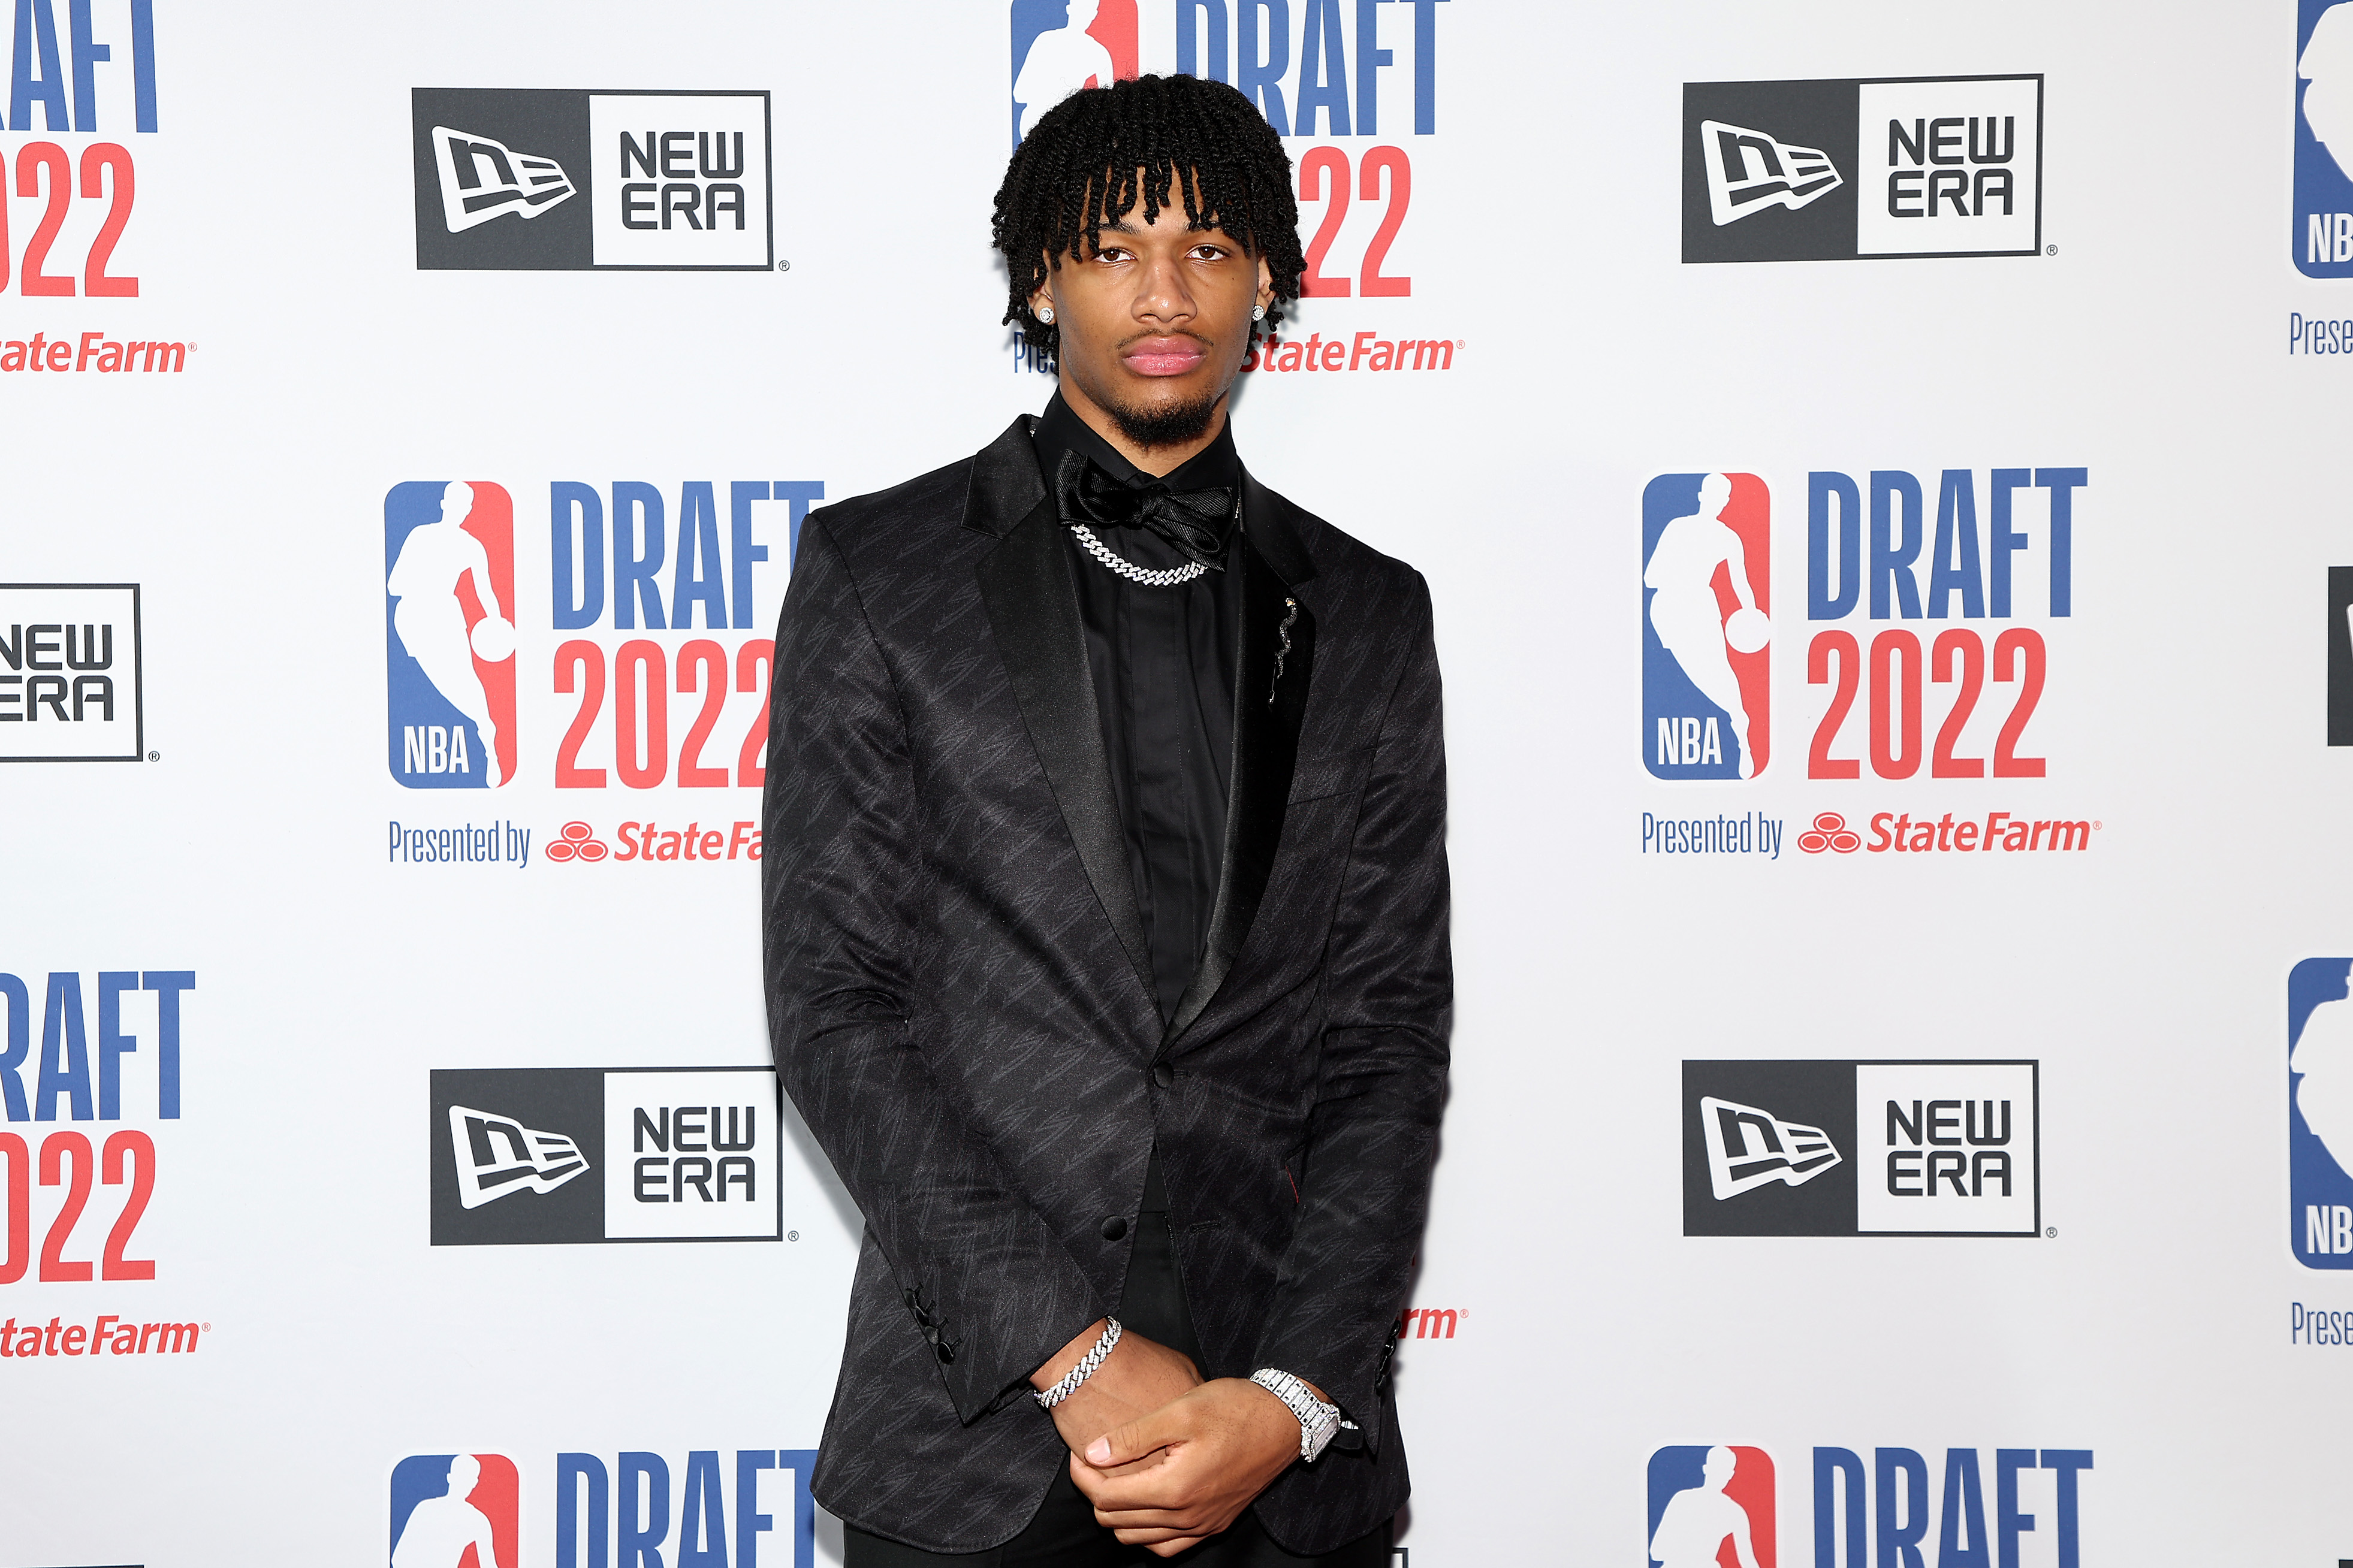 Shaedon Sharpe poses for photos on the red carpet during the 2022 NBA Draft at Barclays Center on June 23, 2022 in New York City.&nbsp;